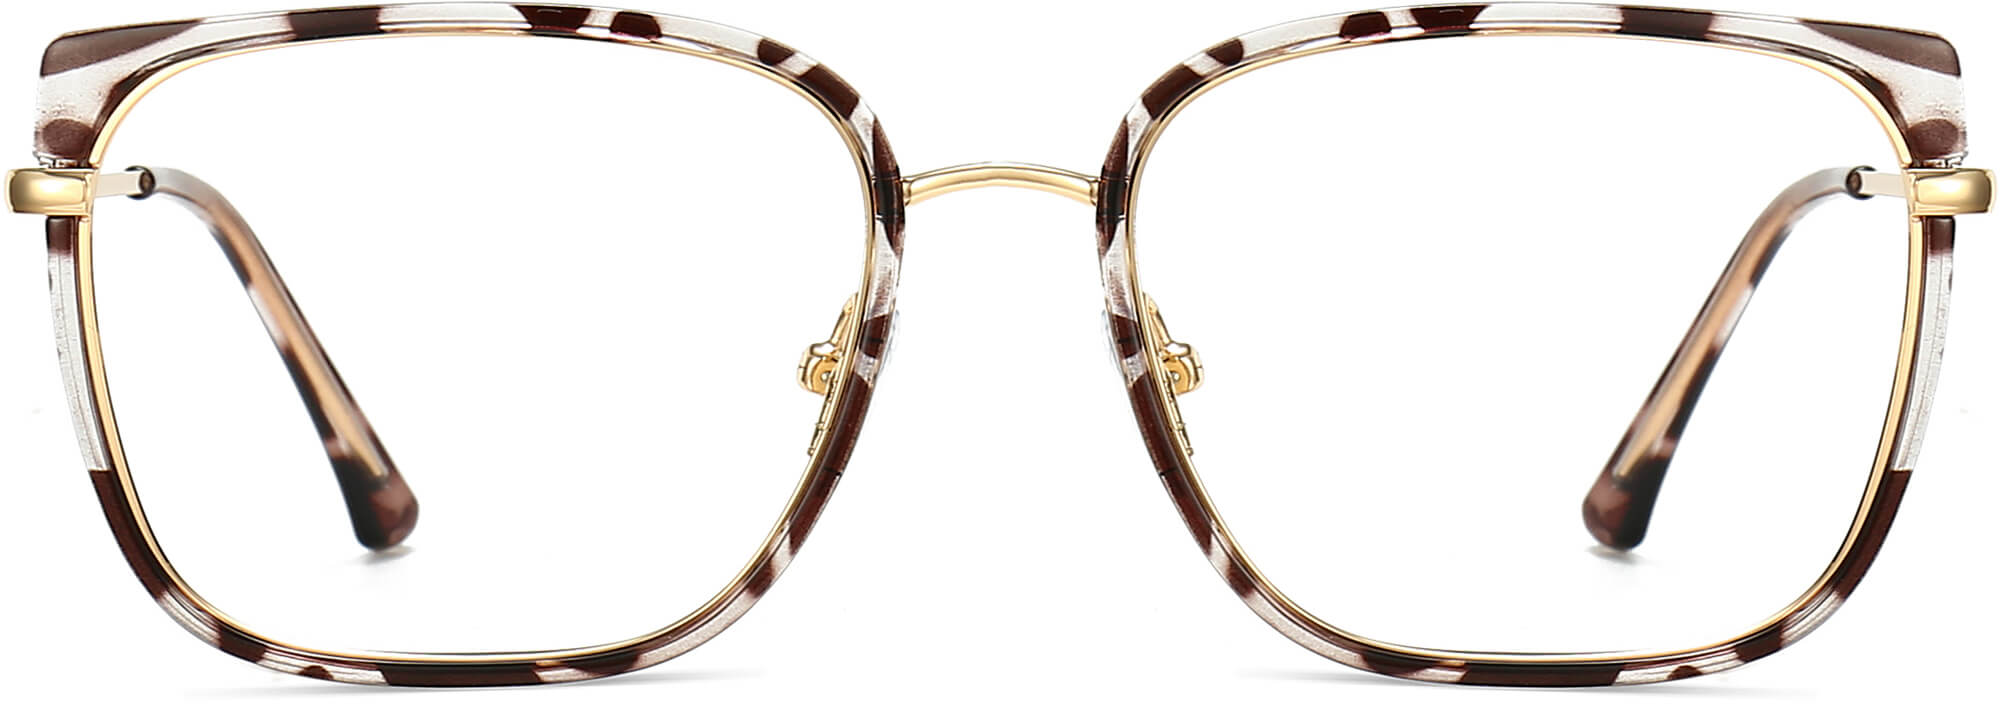 Lvy Square Tortoise Eyeglasses from ANRRI, front view